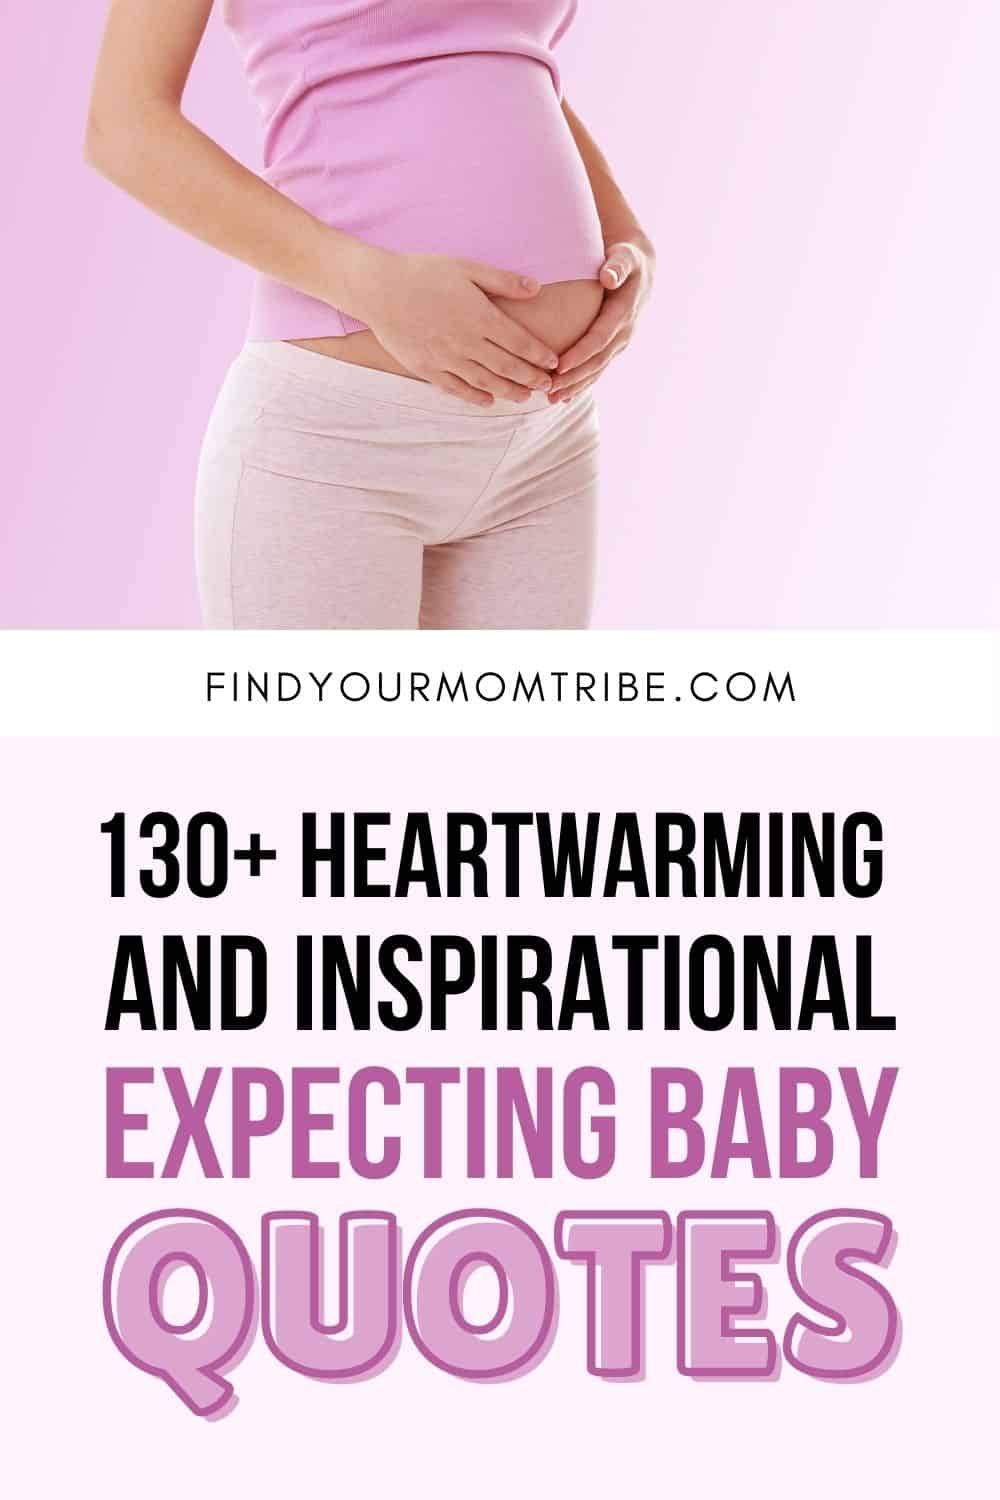 130+ Heartwarming And Inspirational Expecting Baby Quotes Pinterest